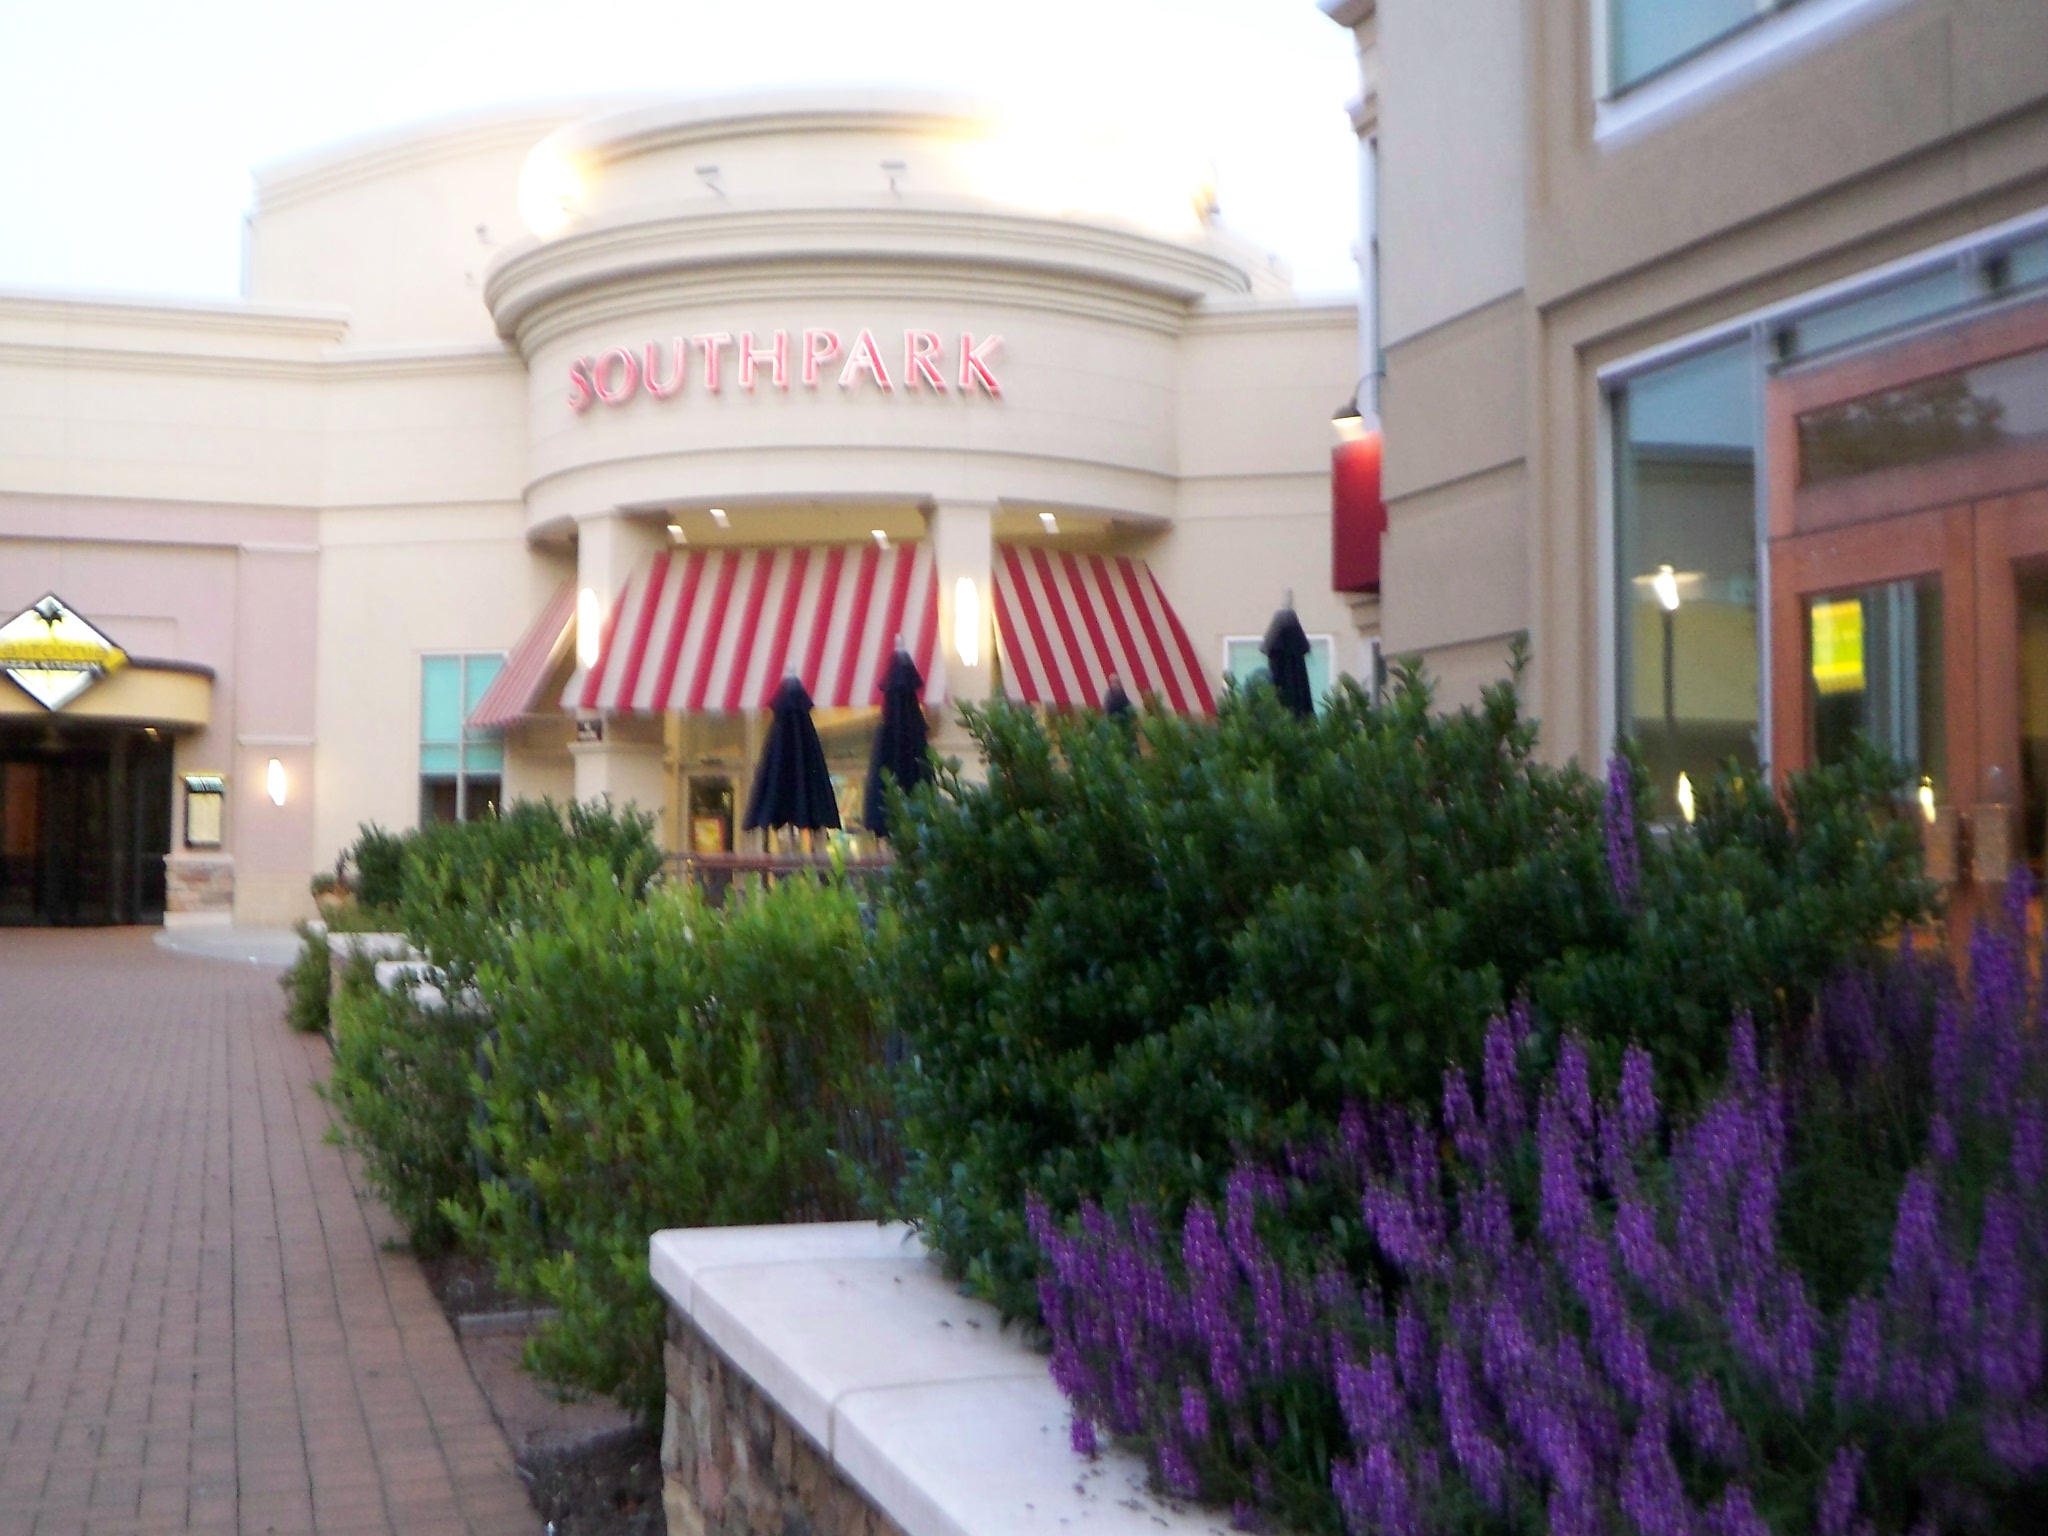 New stores coming this spring to SouthPark mall